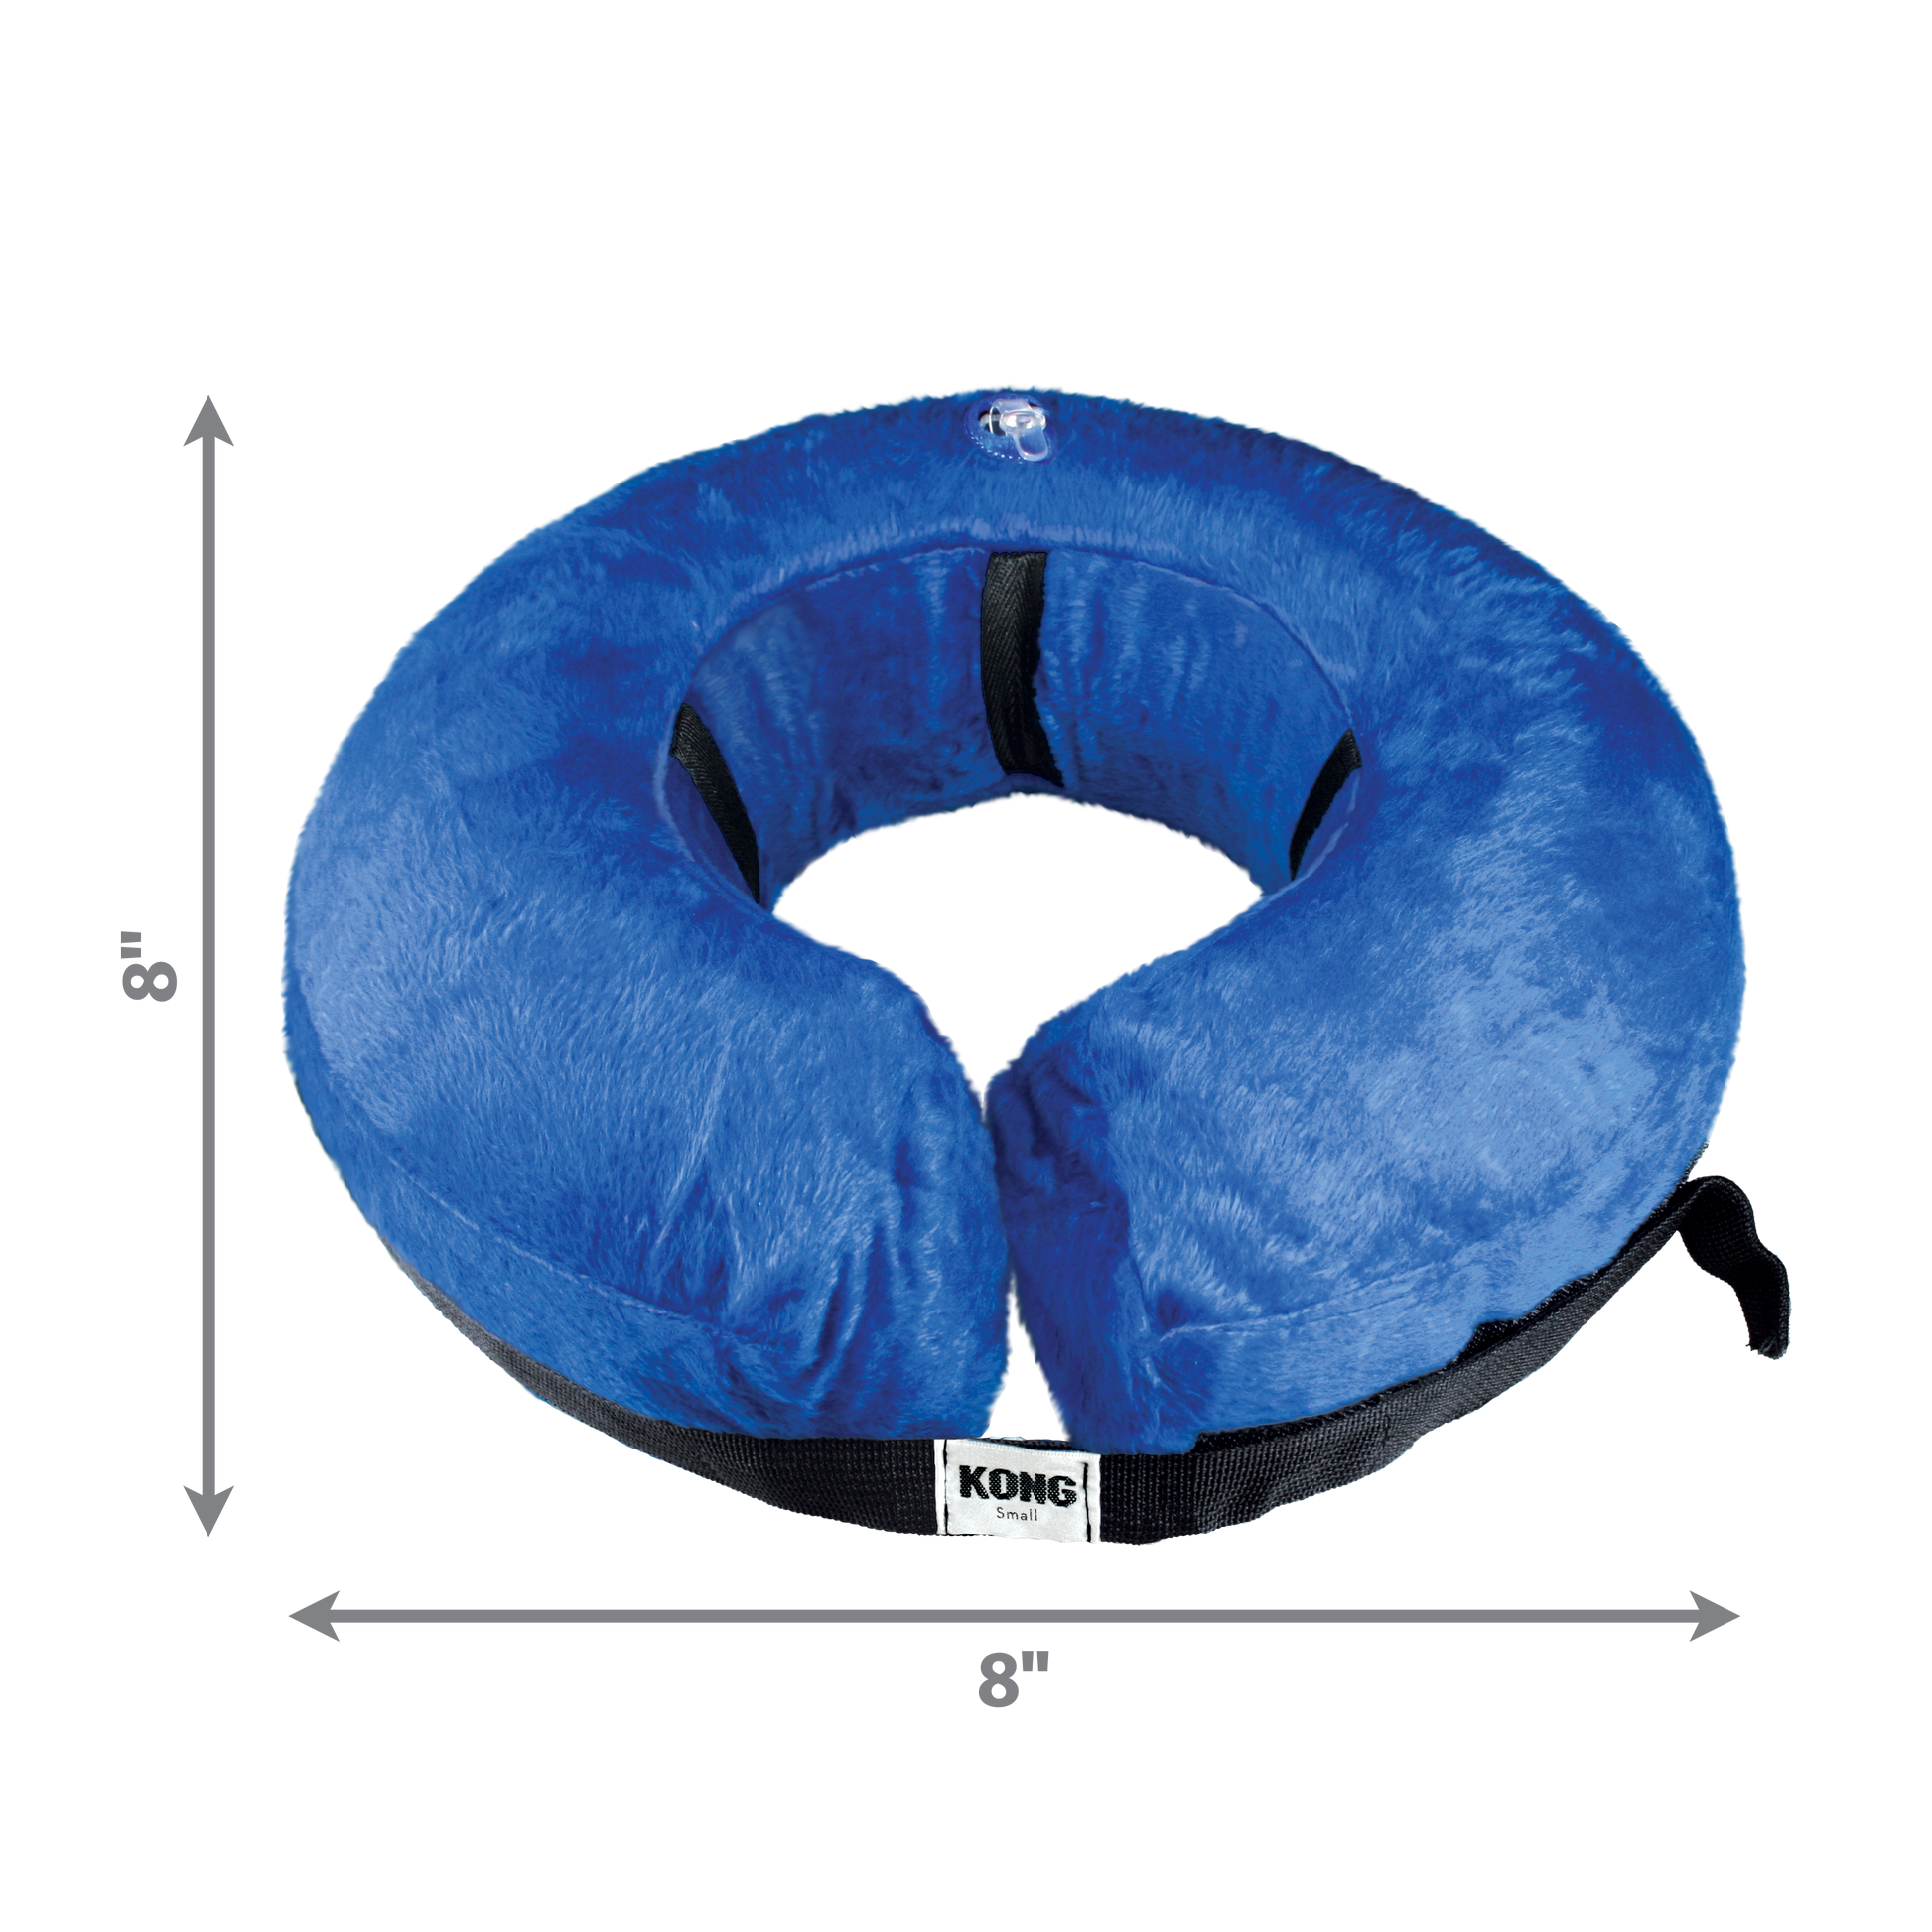 Kong Cloud Collar Inflatable Recovery Cone Alternative (SM) - Tail Blazers Etobicoke